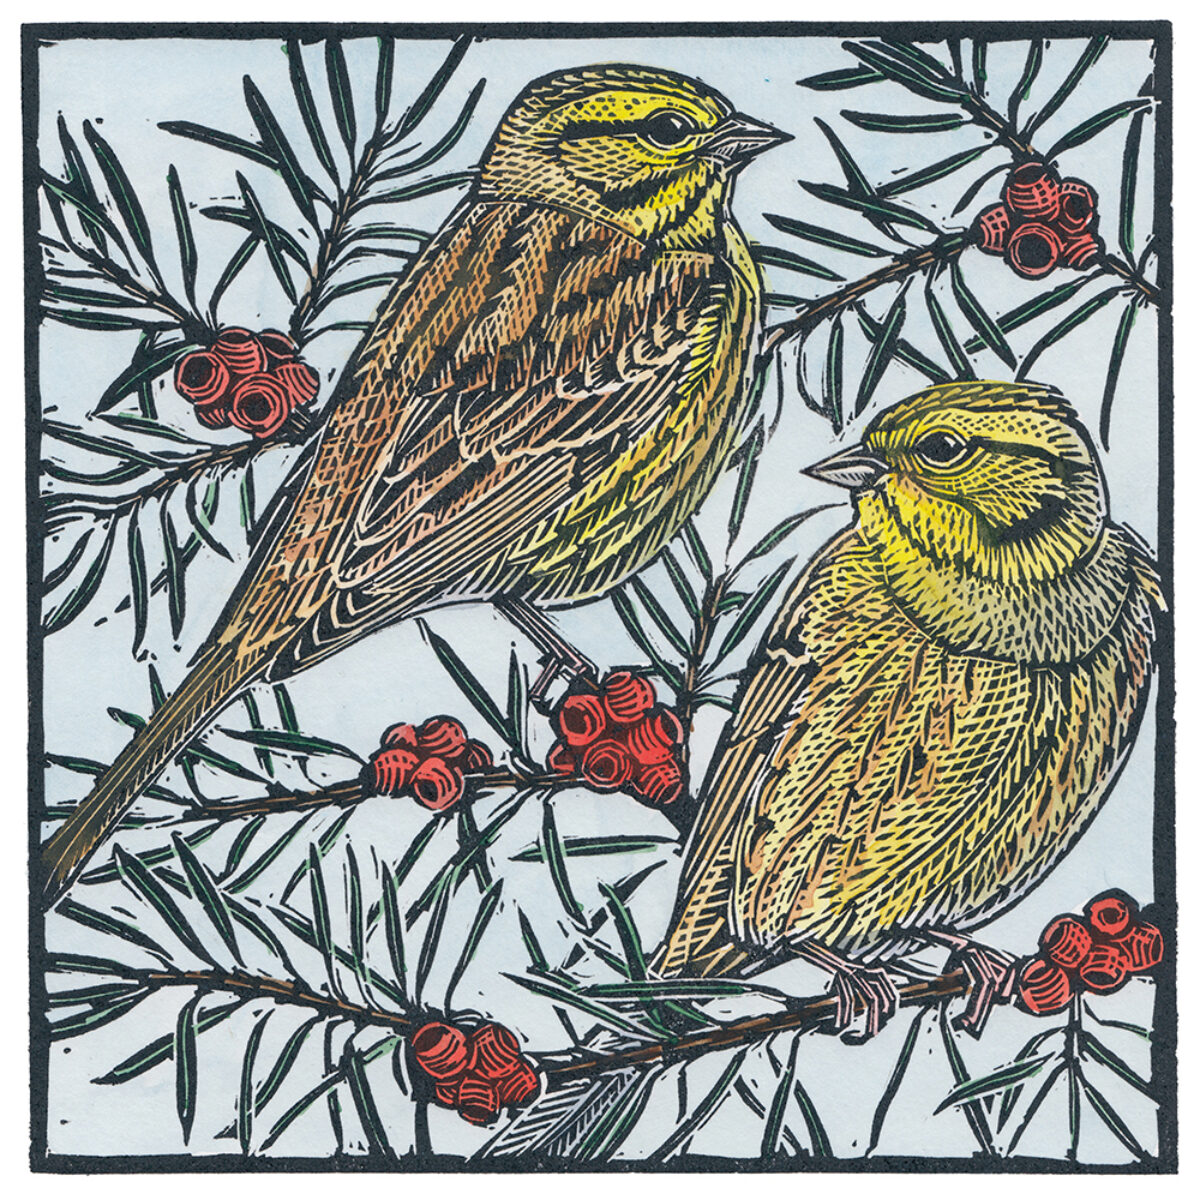 Artwork image titled: Yellowhammers and Yew